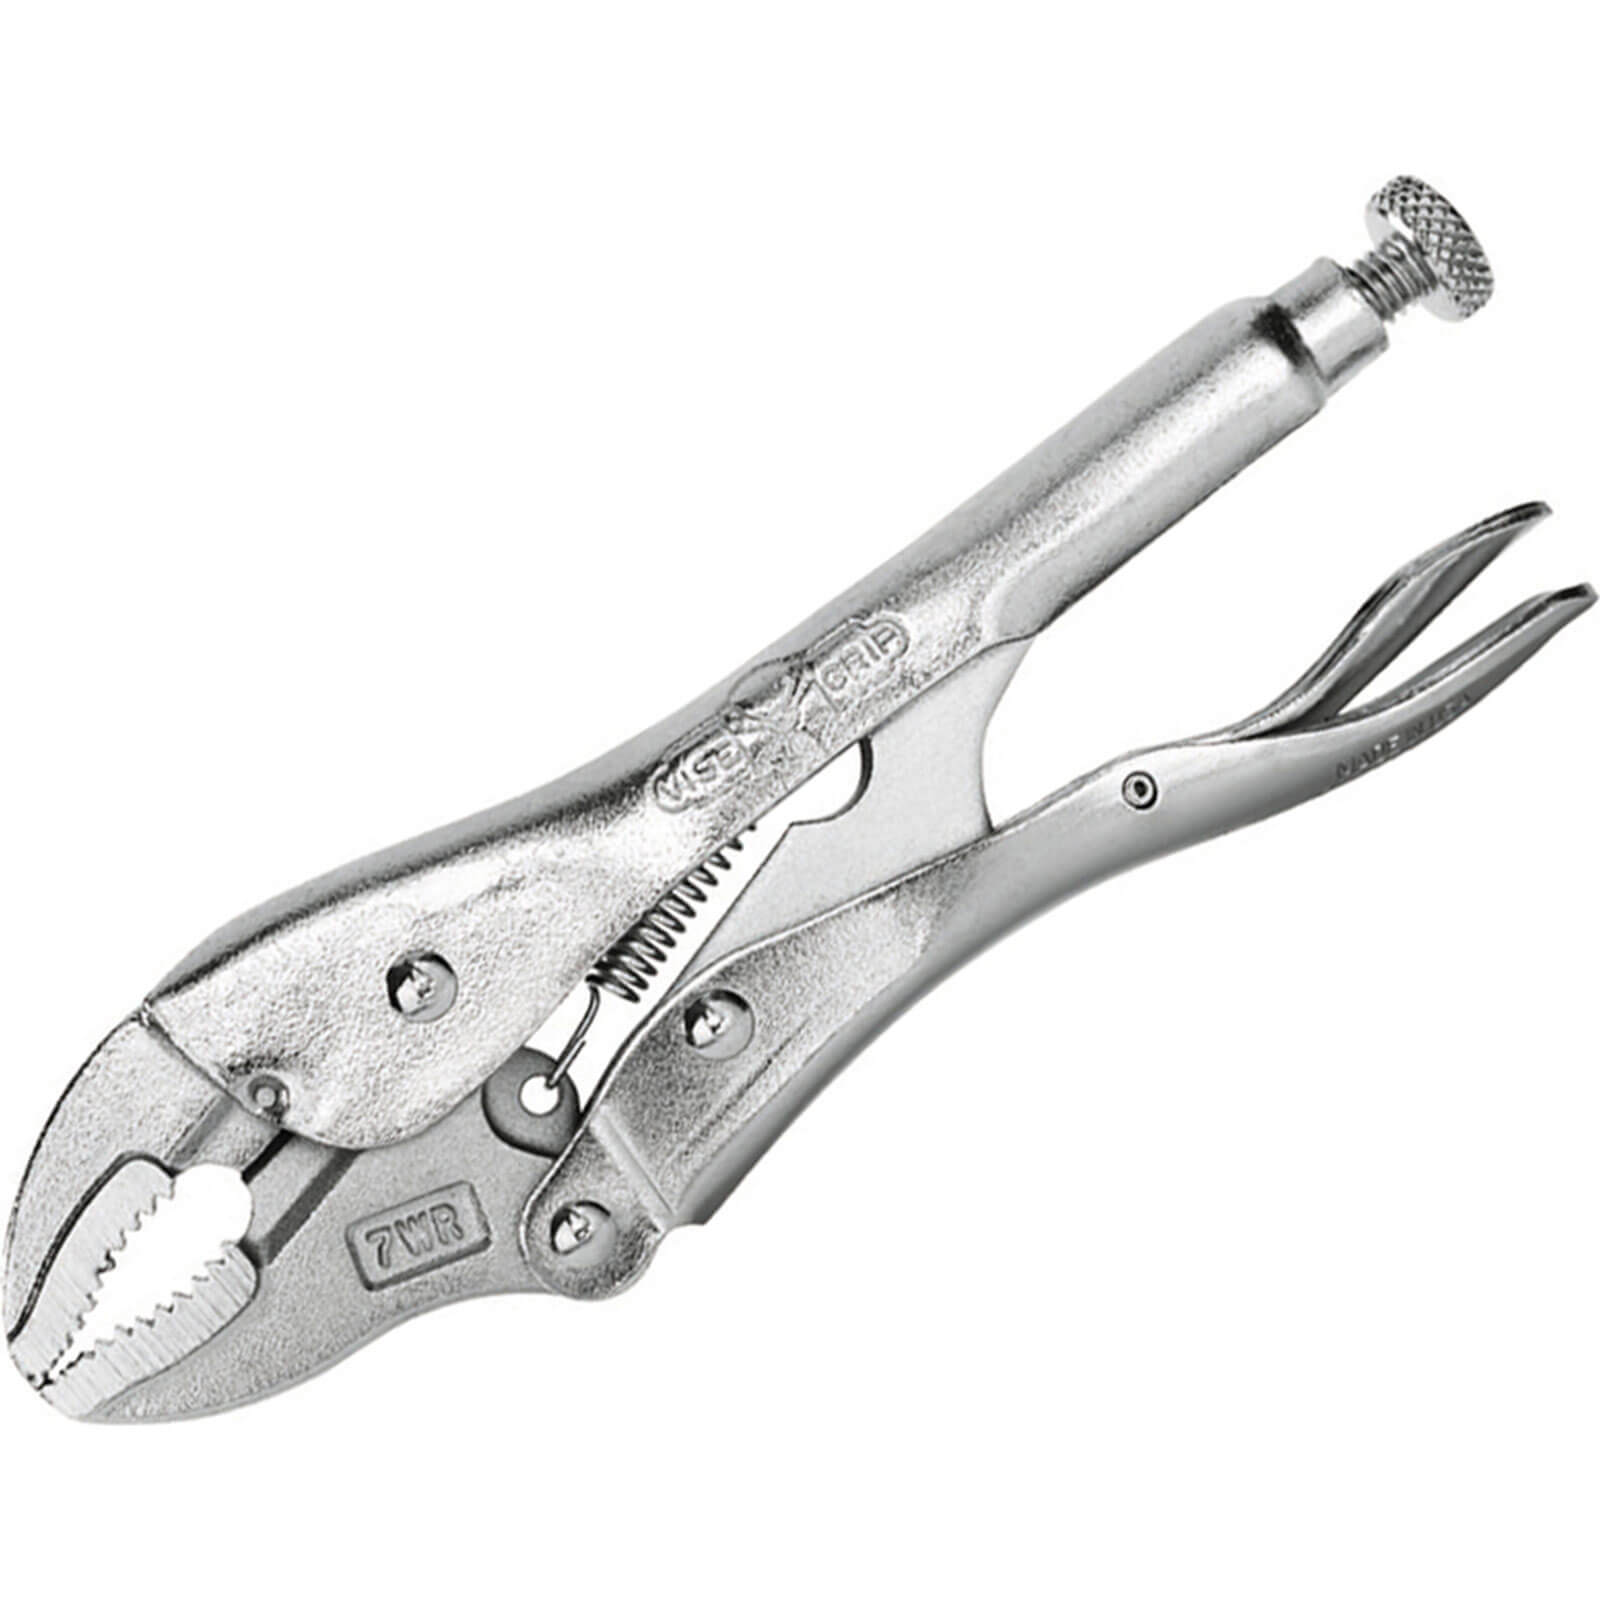 Image of Vise-Grip Curved Jaw Wire Cutting Locking Pliers 180mm